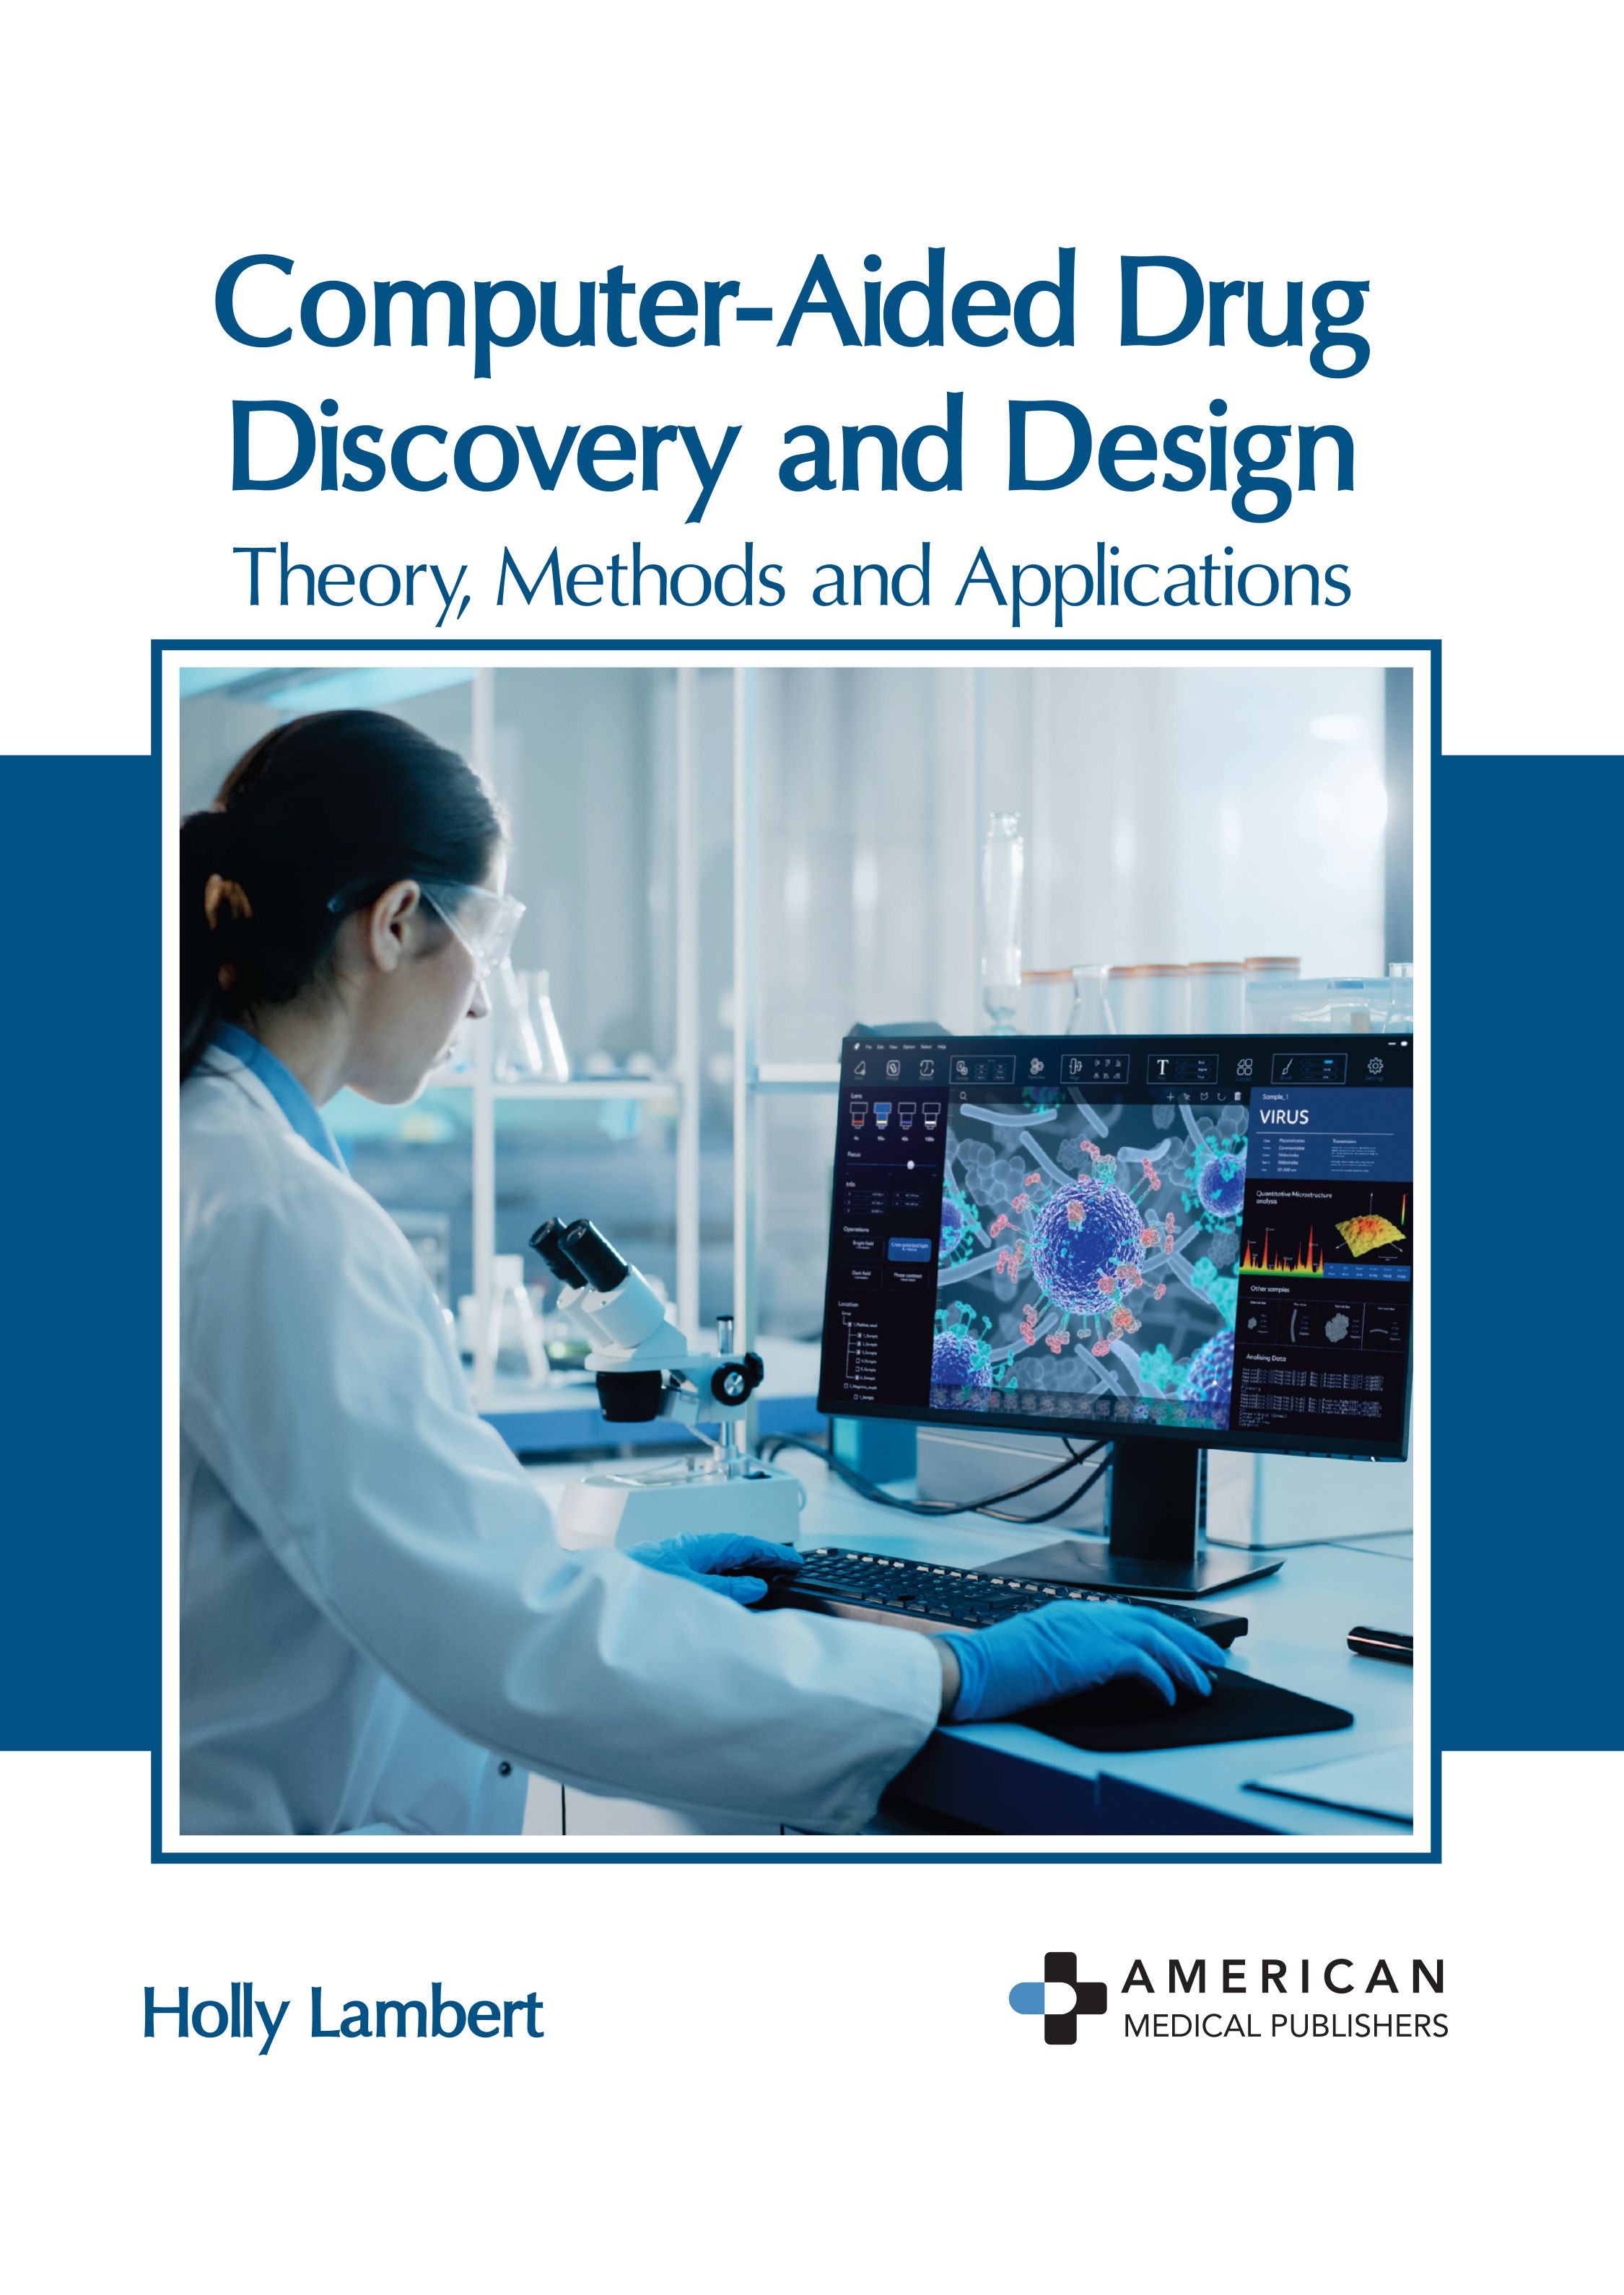 

exclusive-publishers/american-medical-publishers/computer-aided-drug-discovery-and-design-theory-methods-and-applications--9798887400204